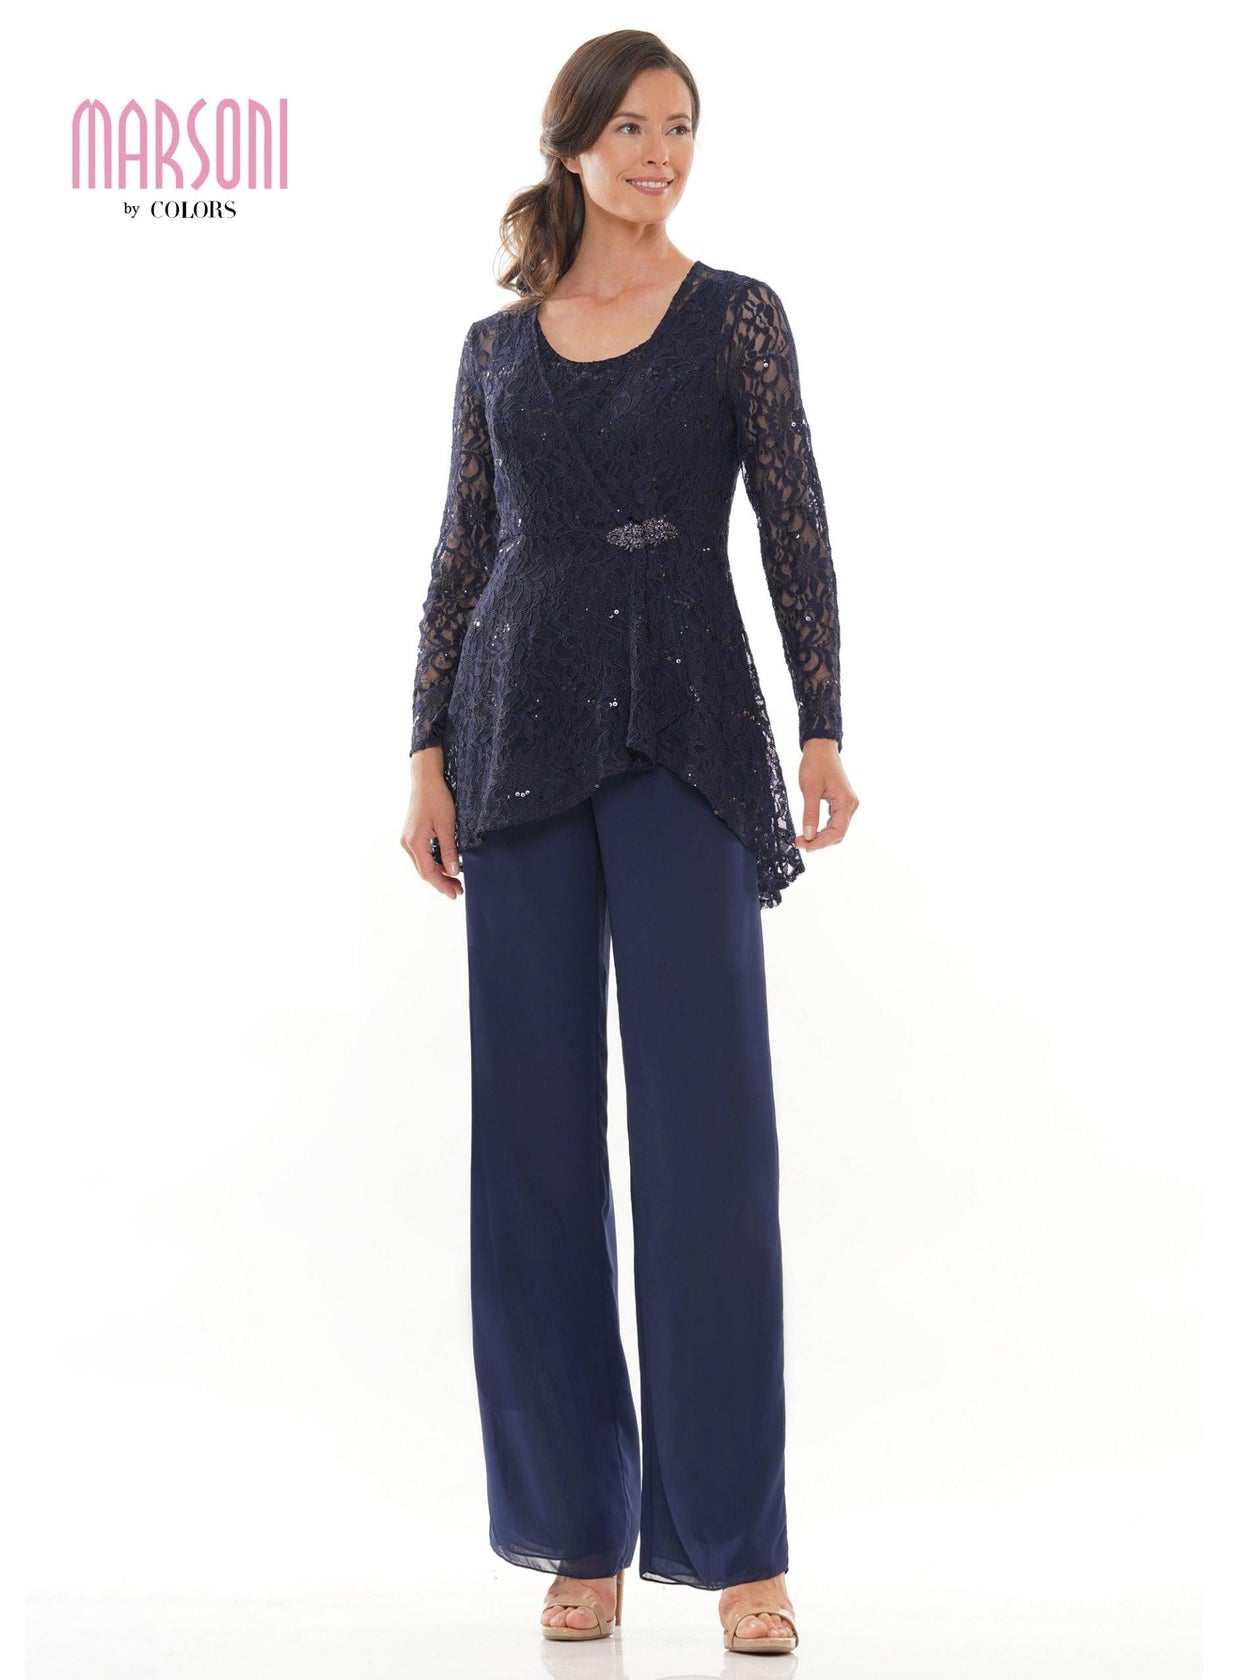 Peacock R&M Richards 5589W Plus Size Mother Of The Bride Pant Suit for  $39.99, – The Dress Outlet